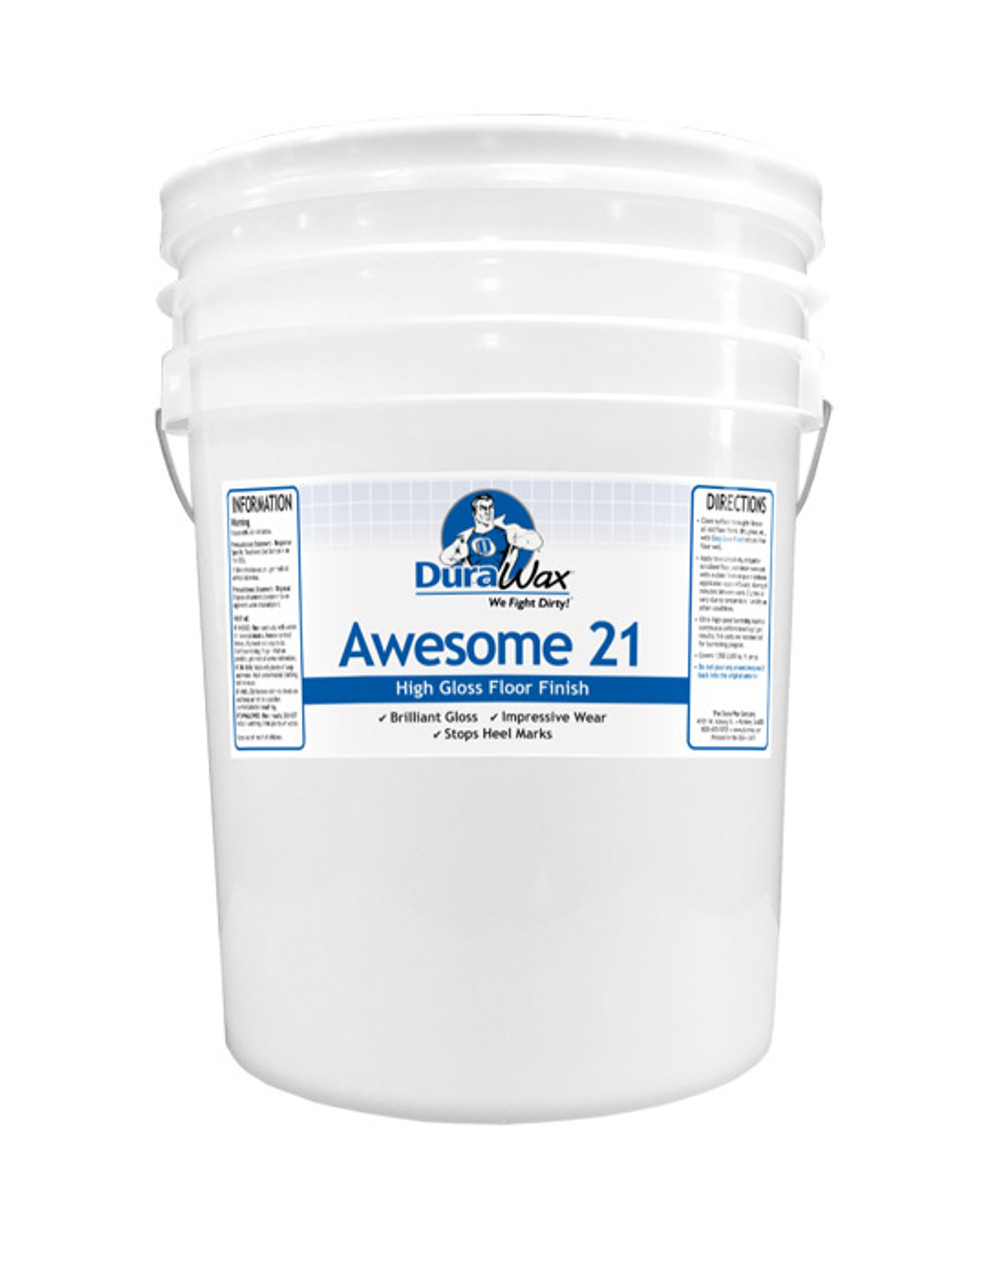 Awesome 21 is Our Most Popular Floor Finish!